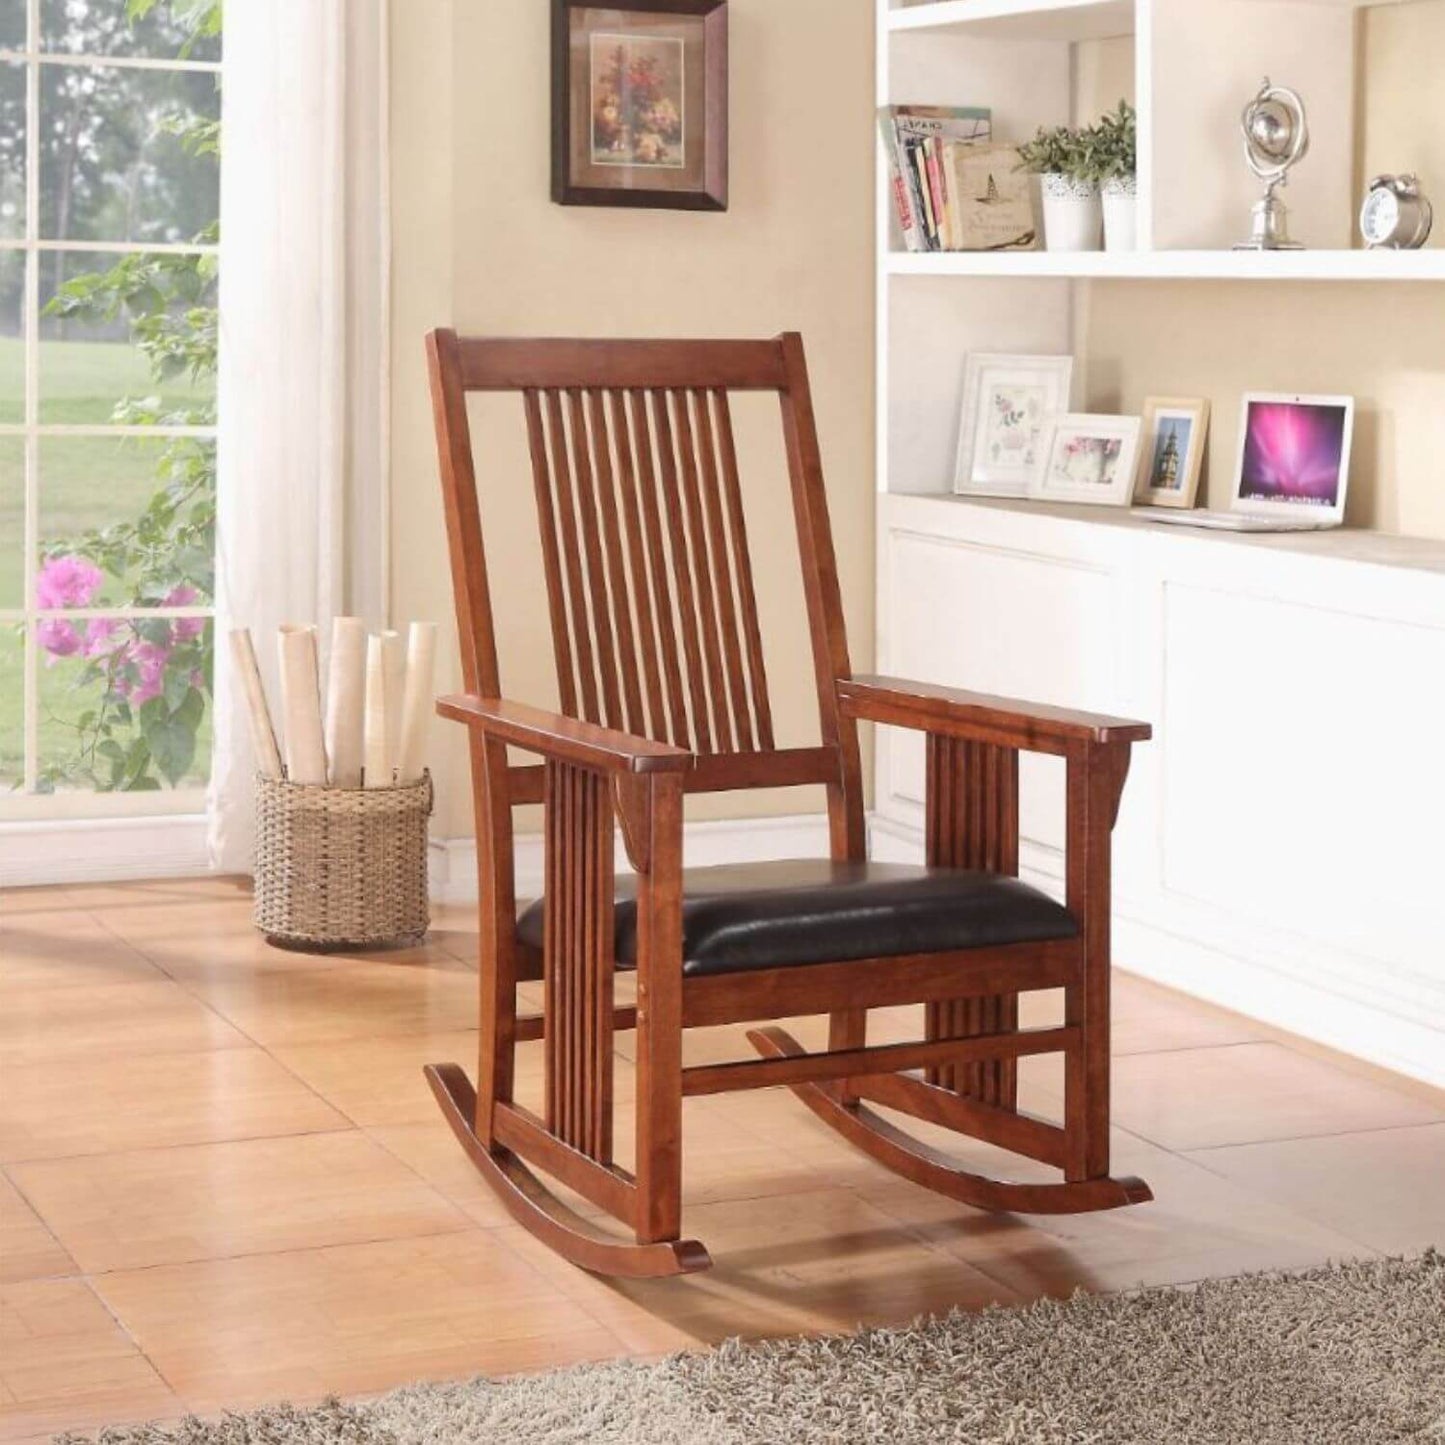 ACME Kloris Rocking Chair in Tobacco - Lifestyle